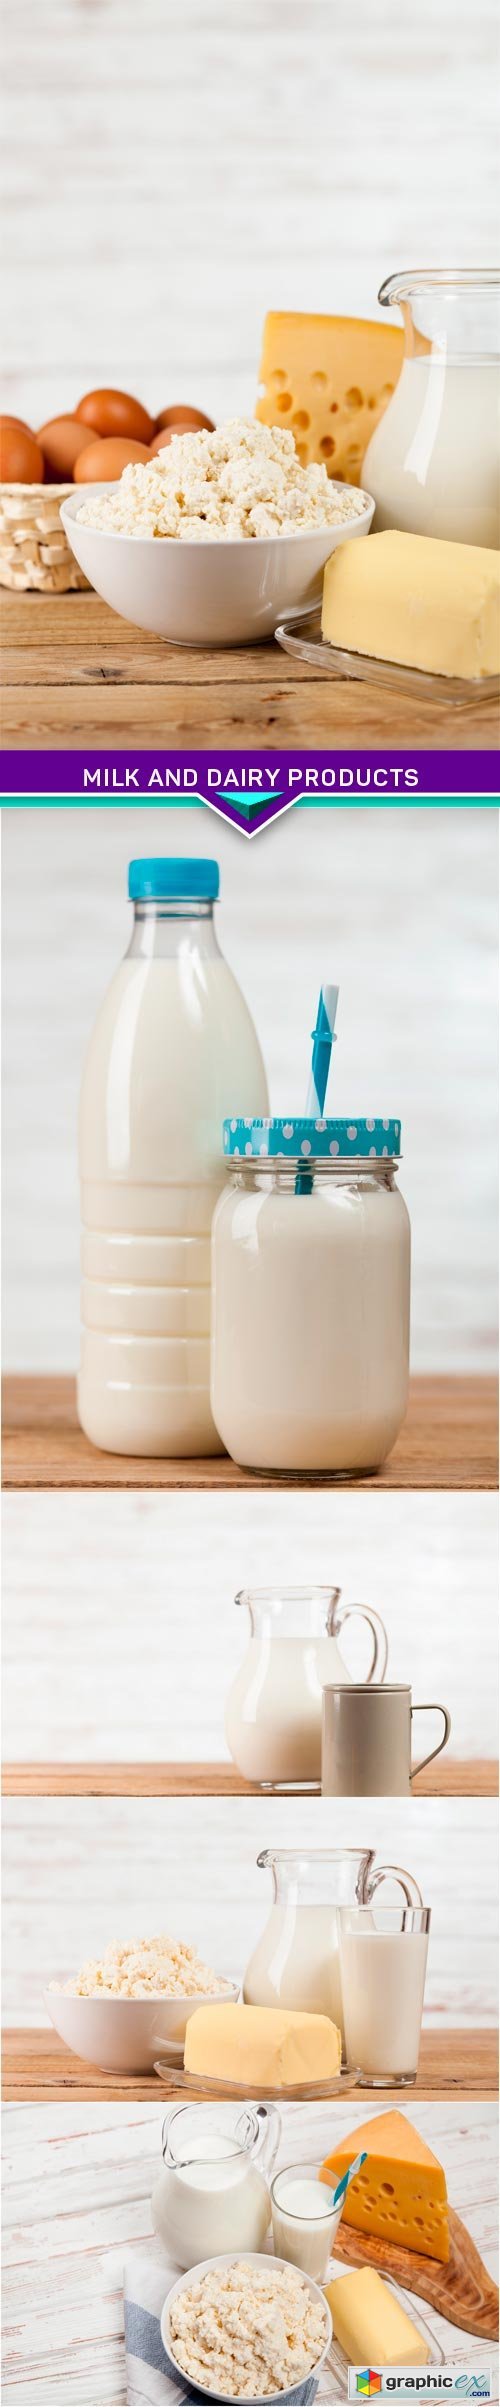 Milk and dairy products 5x JPEG